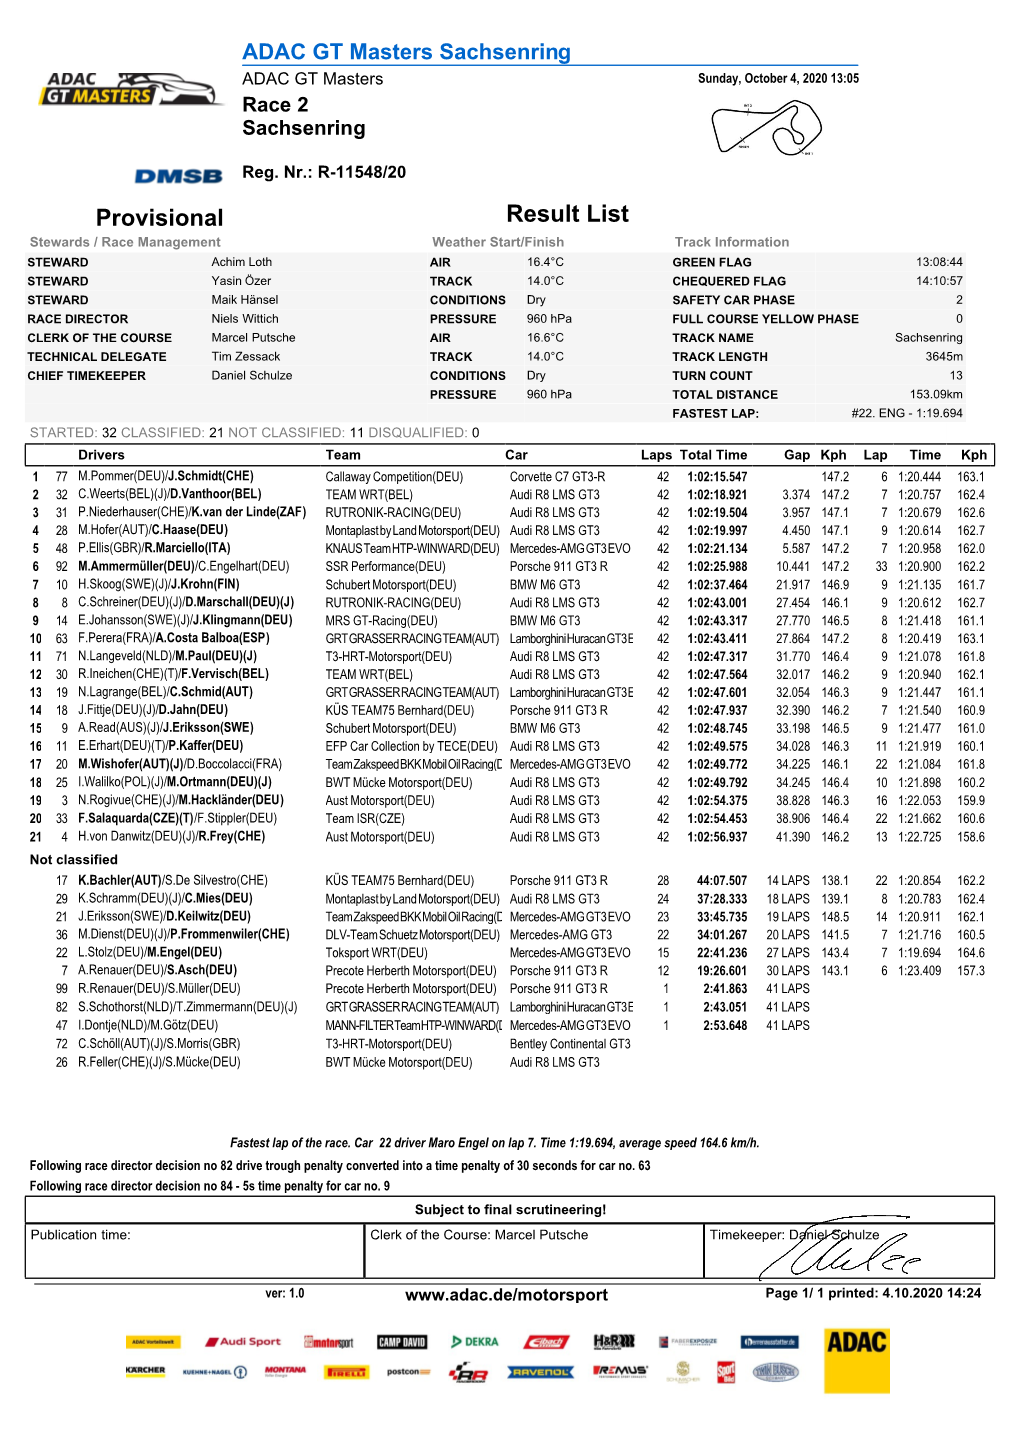 Race 2 Result